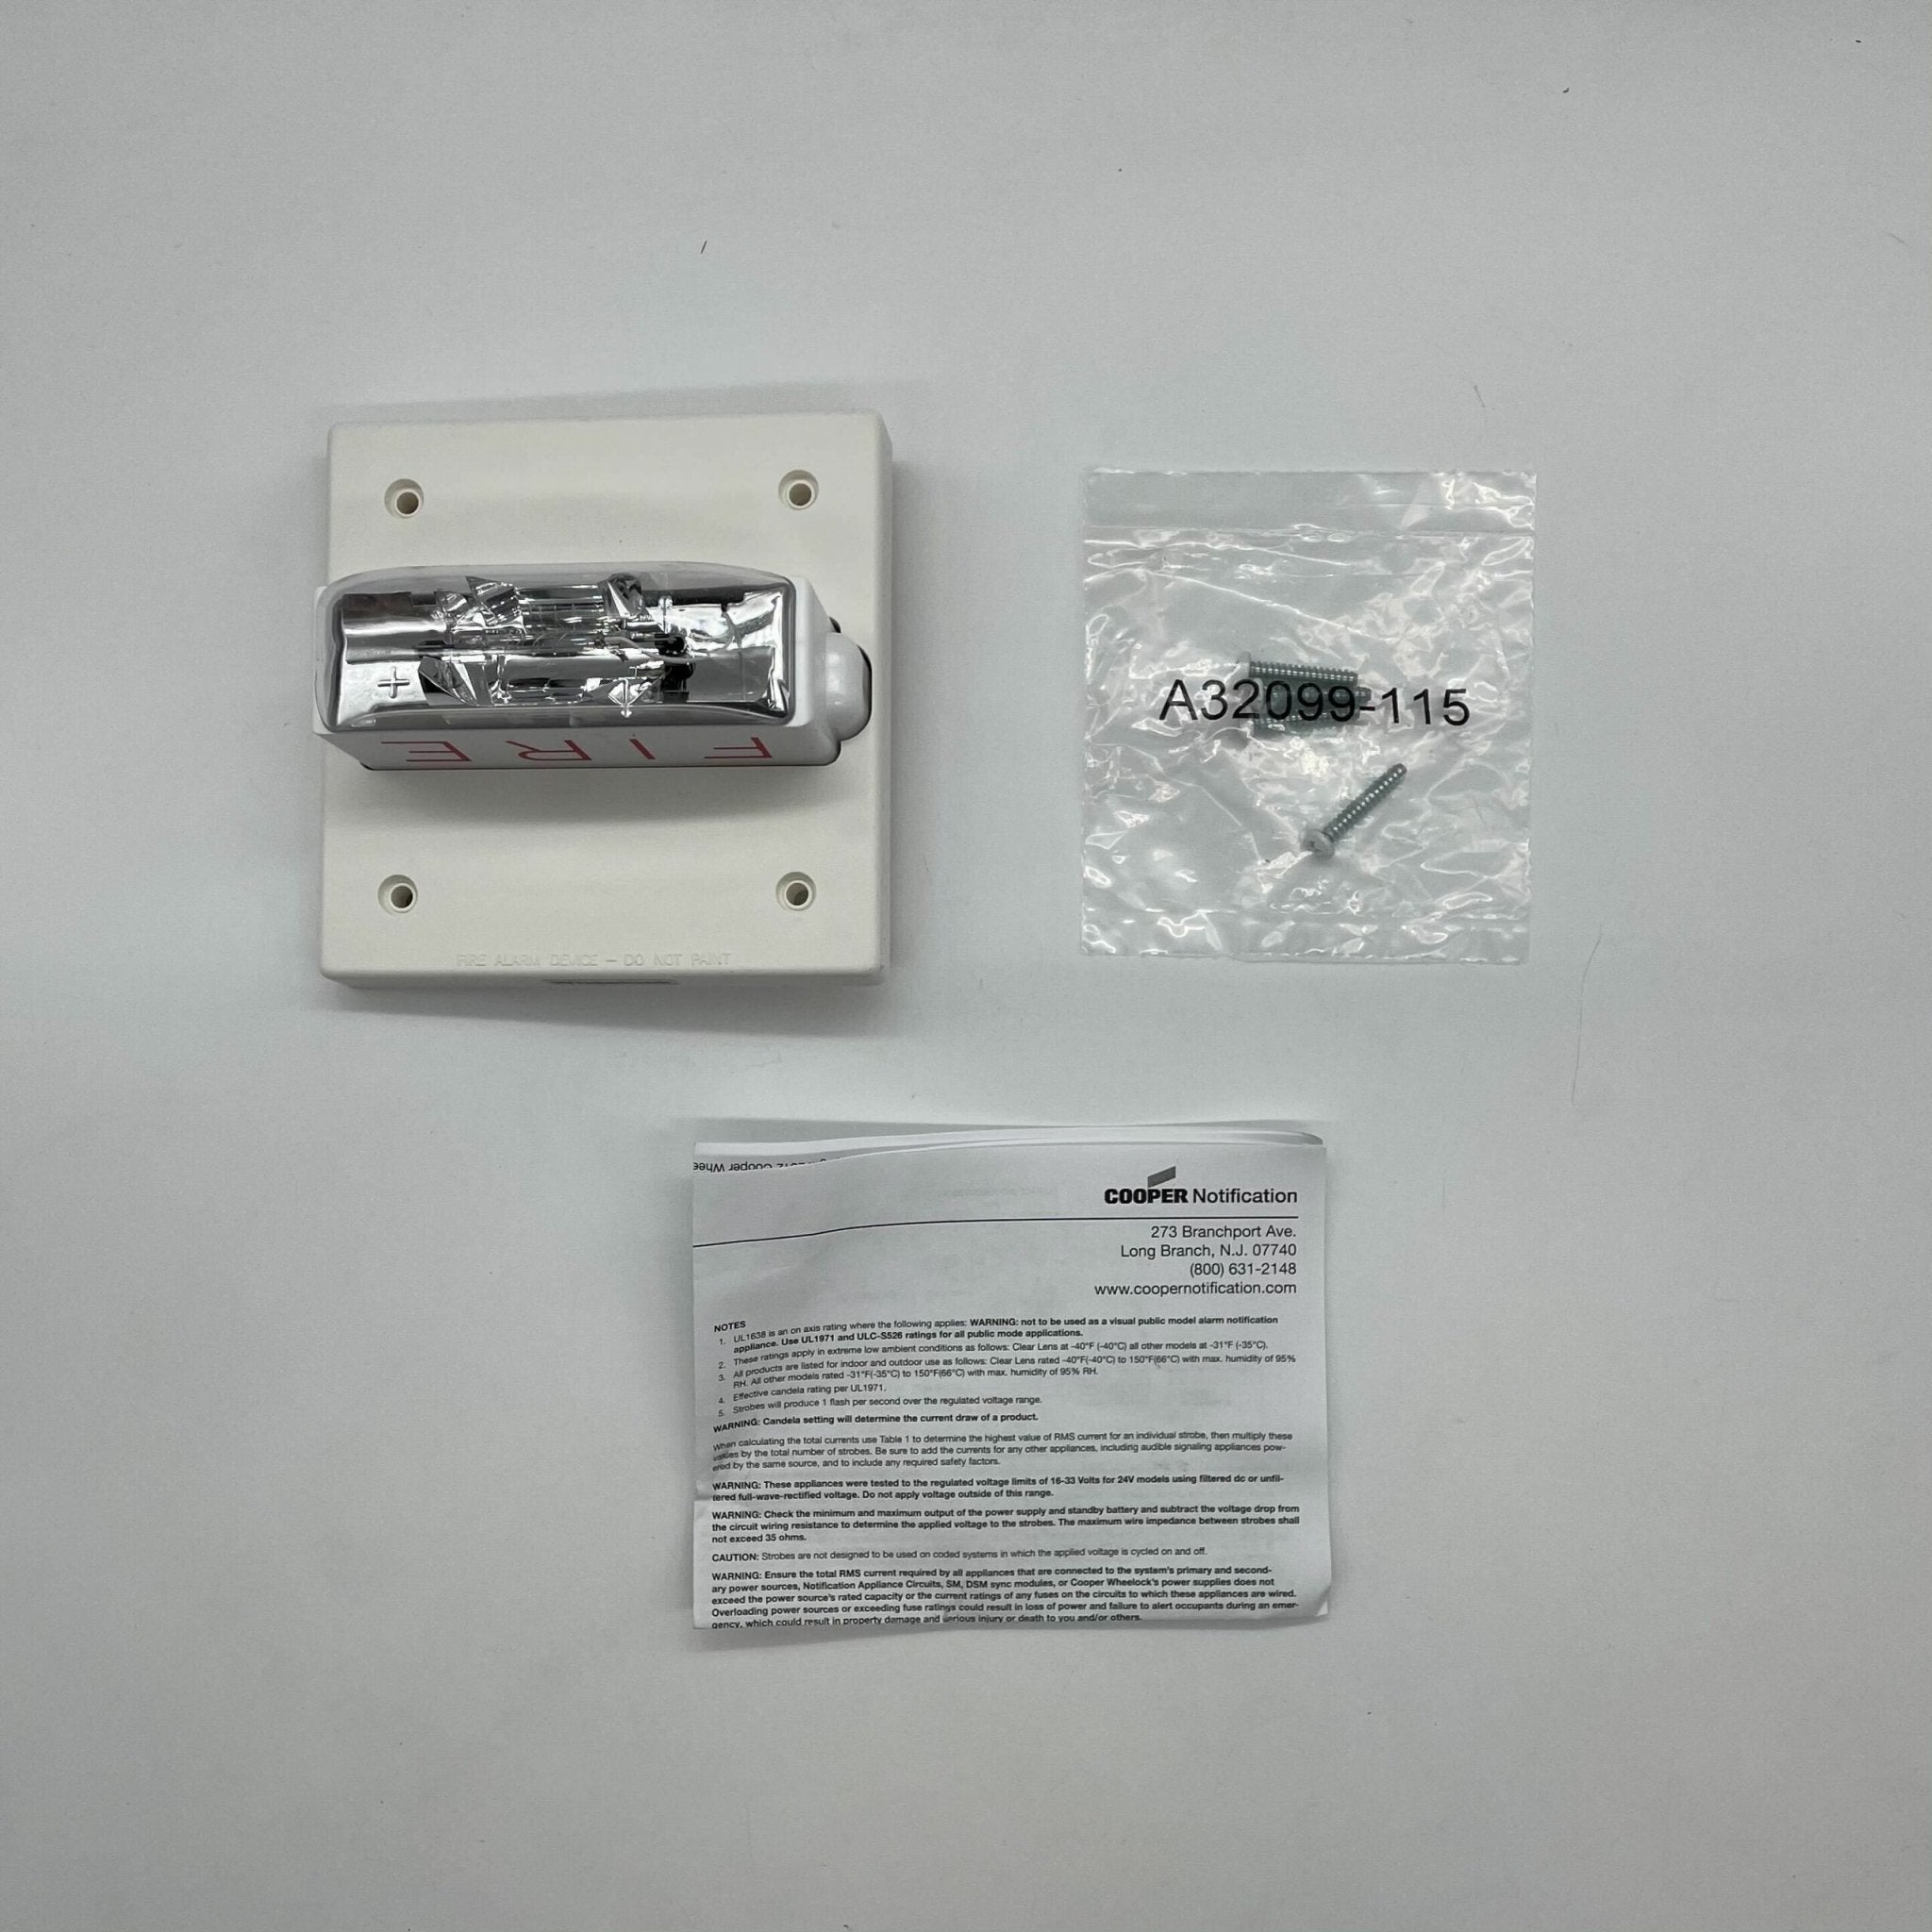 Wheelock RSSWP-24MCCH-FW - The Fire Alarm Supplier